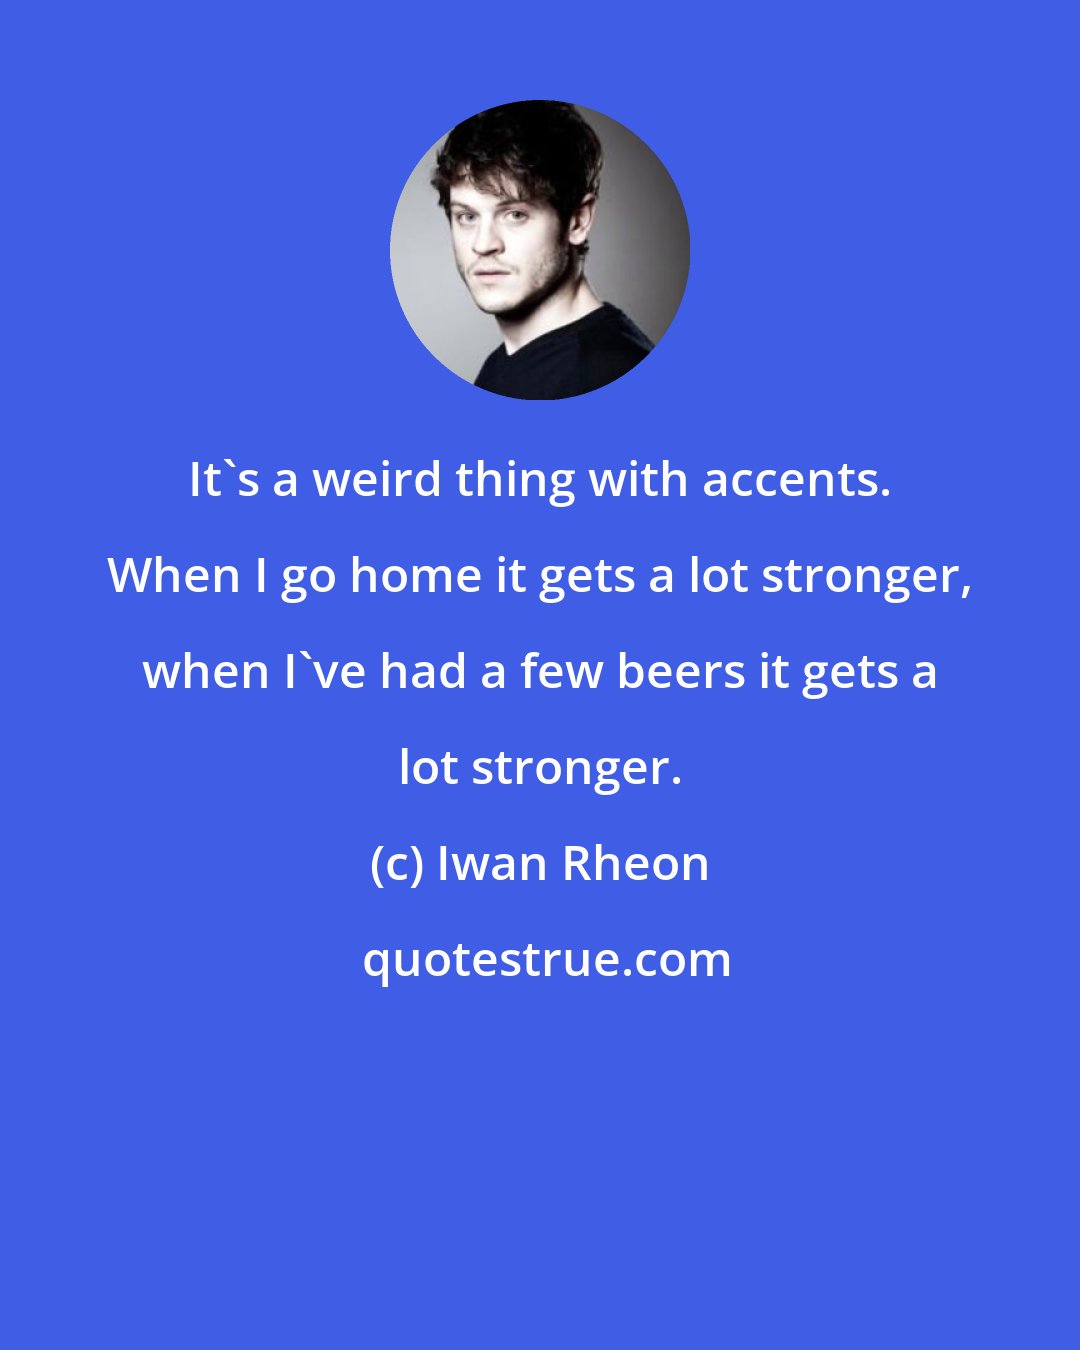 Iwan Rheon: It's a weird thing with accents. When I go home it gets a lot stronger, when I've had a few beers it gets a lot stronger.